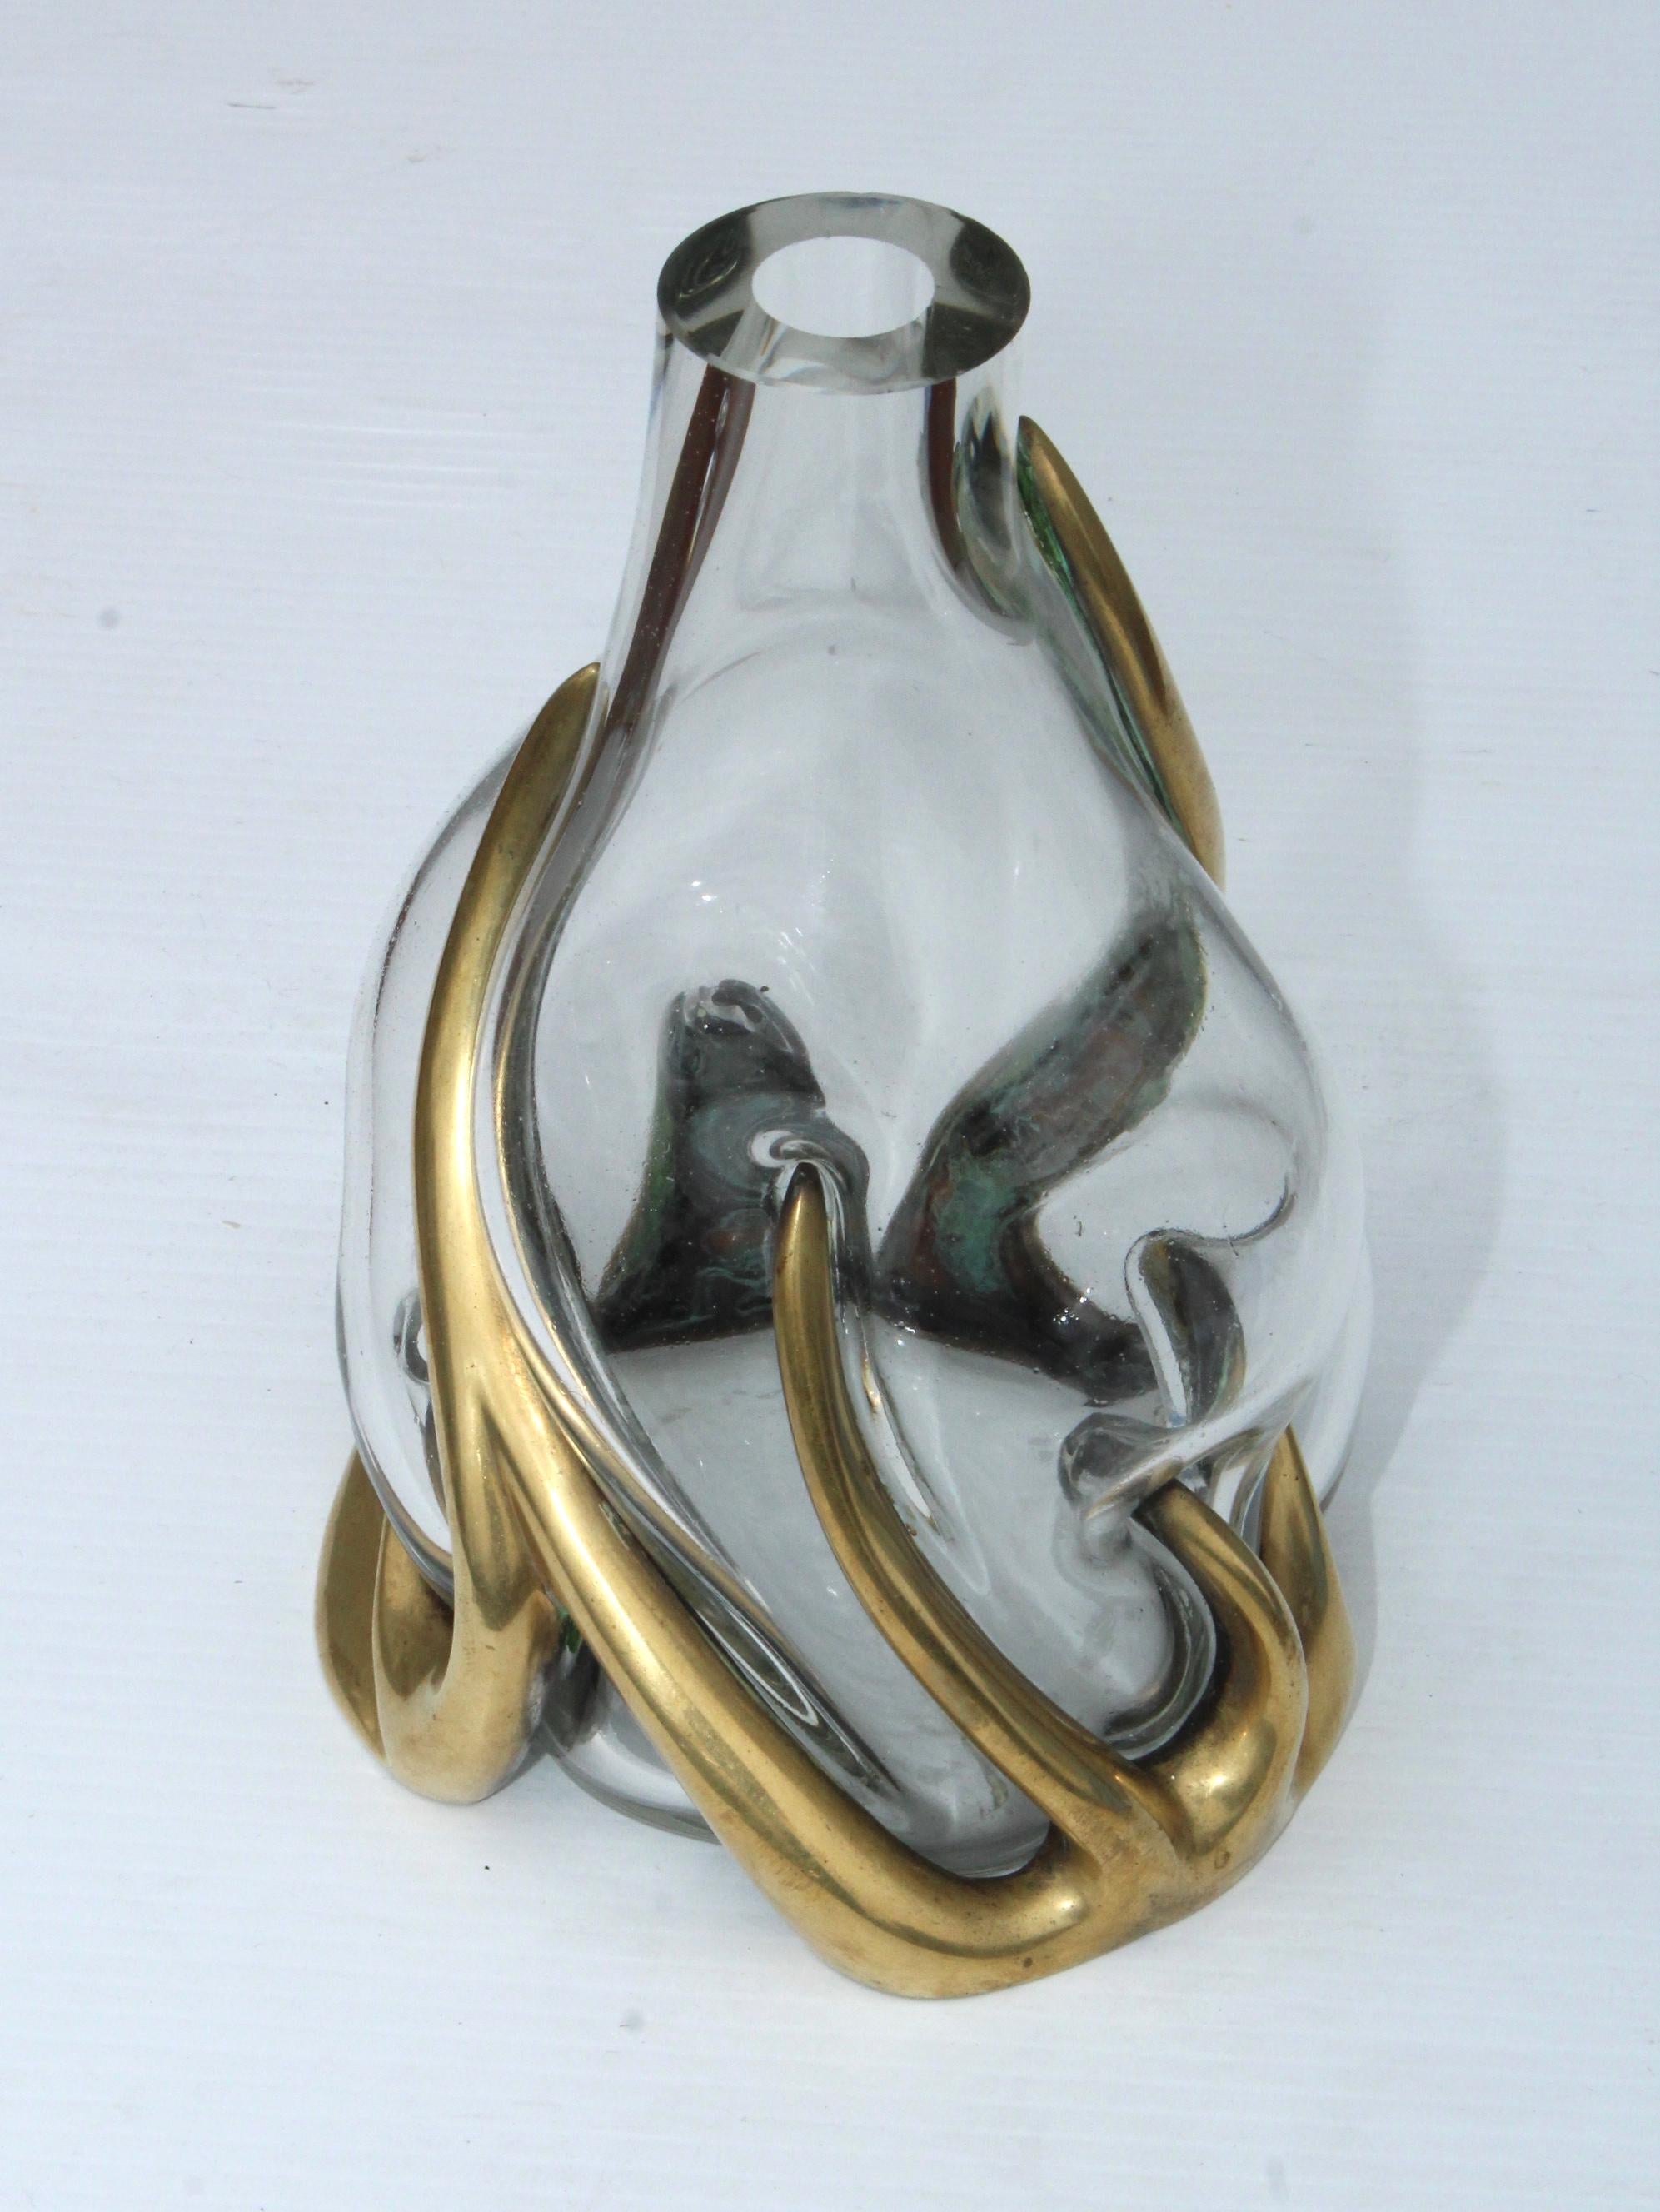 Stunning 1940s hand blown glass and bronze Art Deco vase by Nepir Portugal.